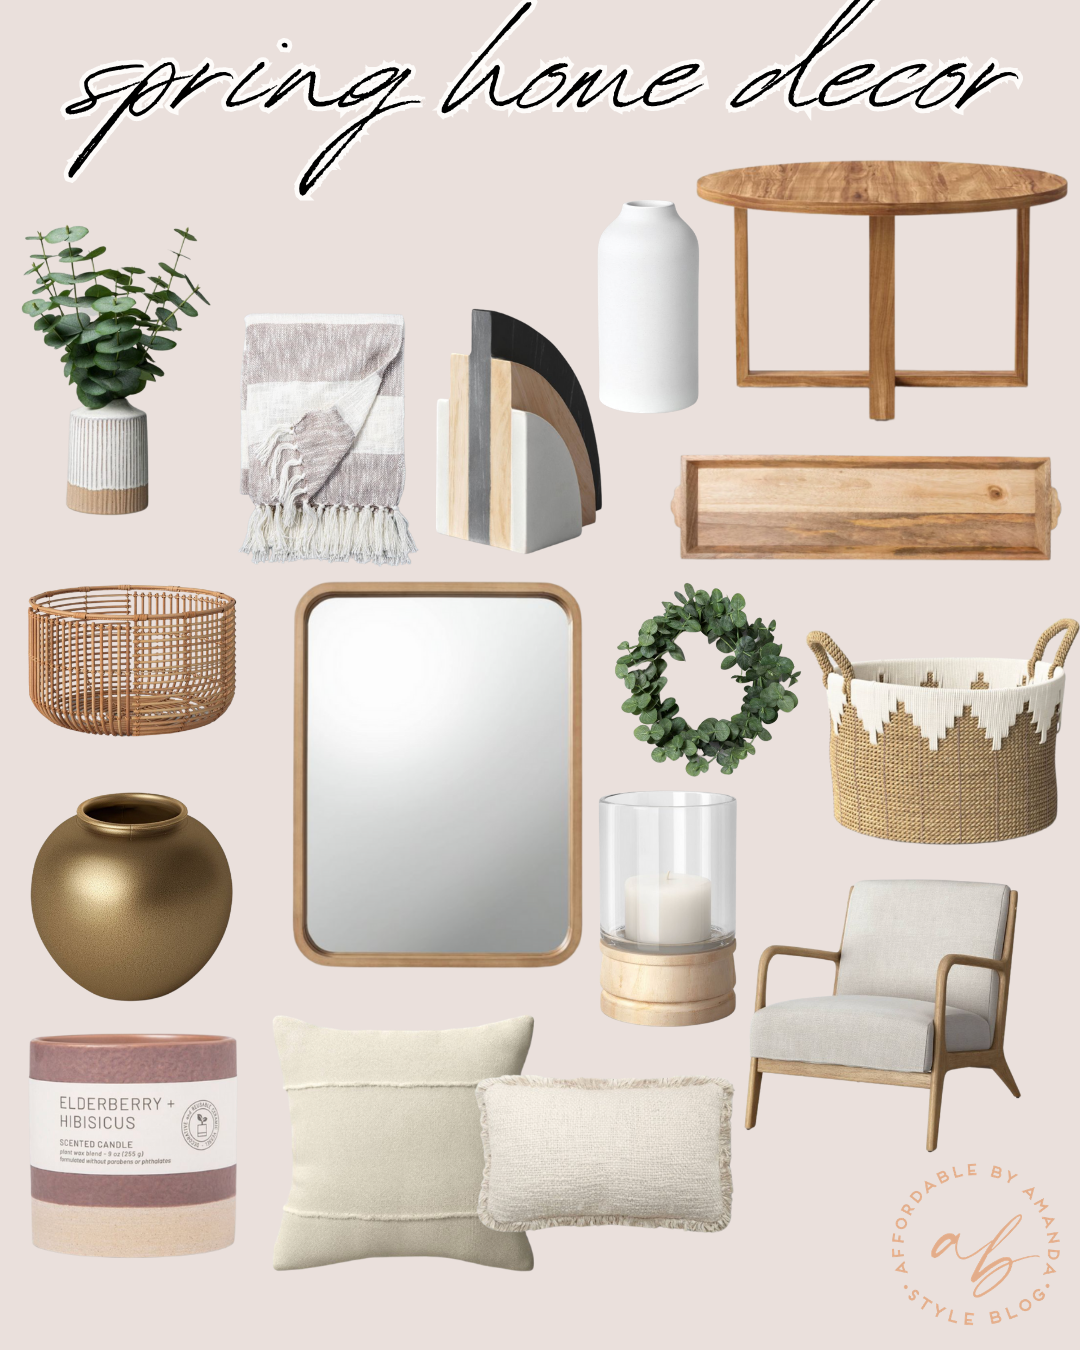 Target Home Decor Ideas: Spring 2021 | Affordable by Amanda | Affordable Spring Home Decor at Target